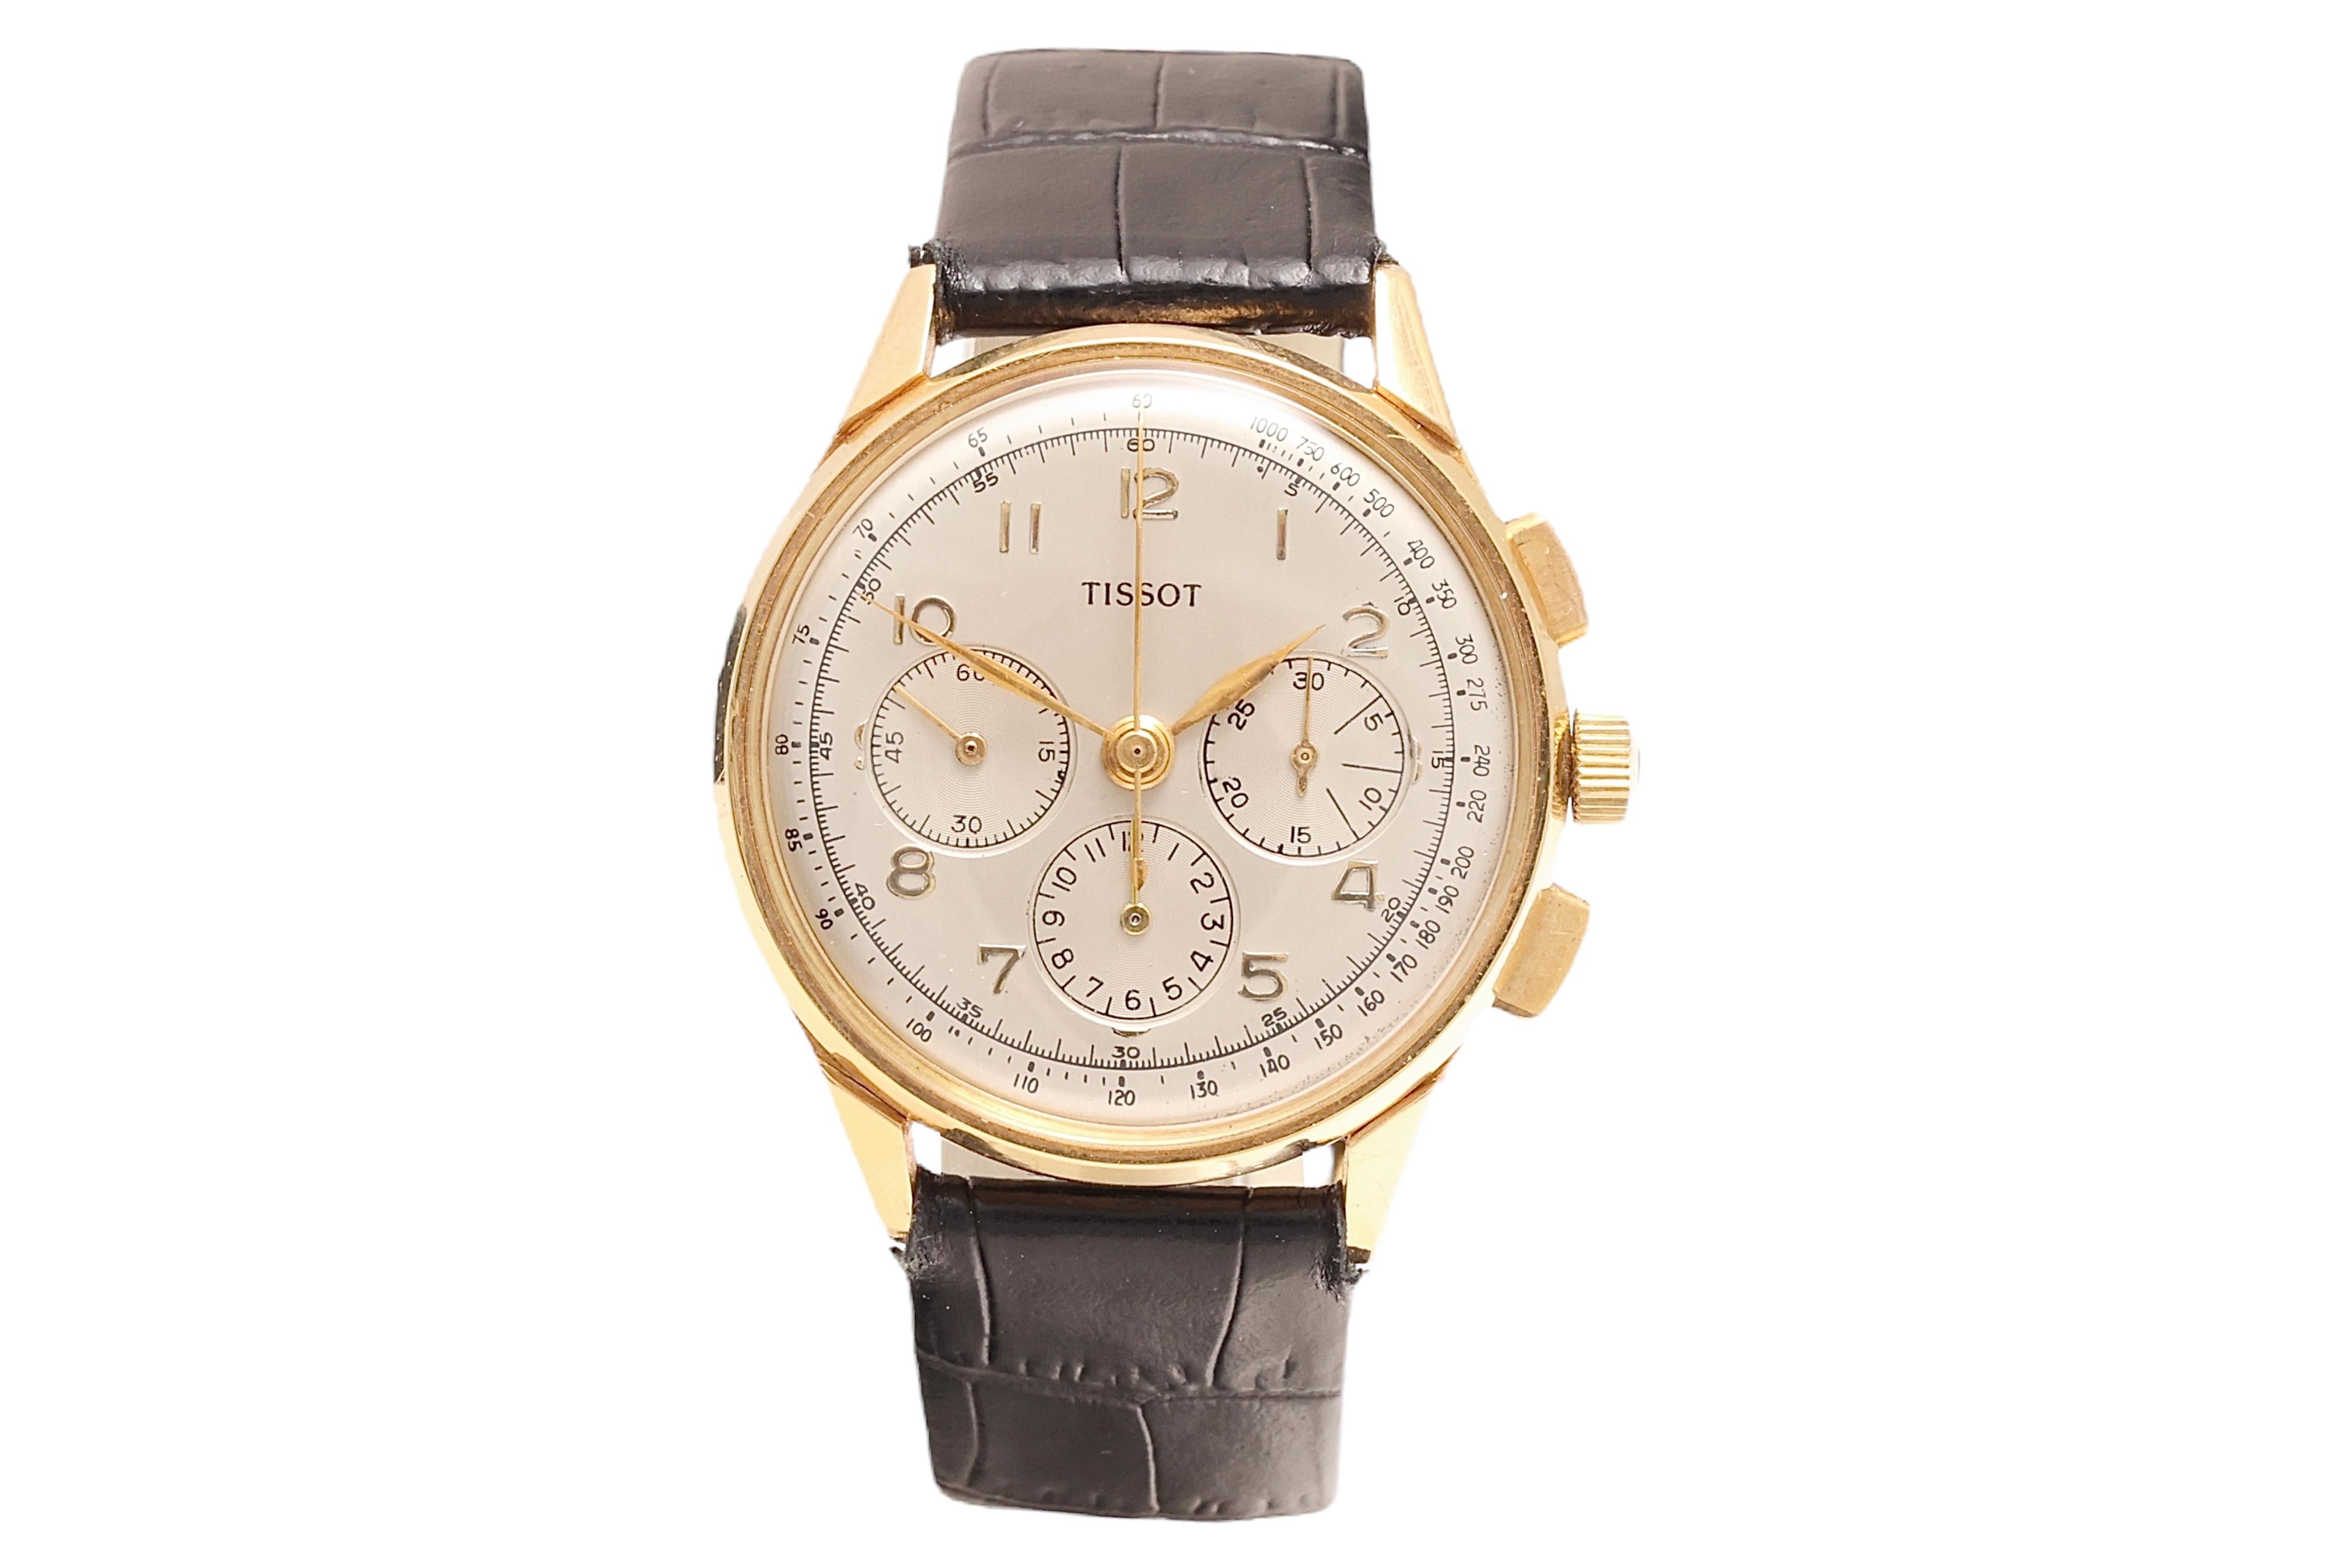 Artisan Vintage 18kt Gold Tissot Manual Winding Chronograph Watch, Cal. Lemania 27.41 H For Sale